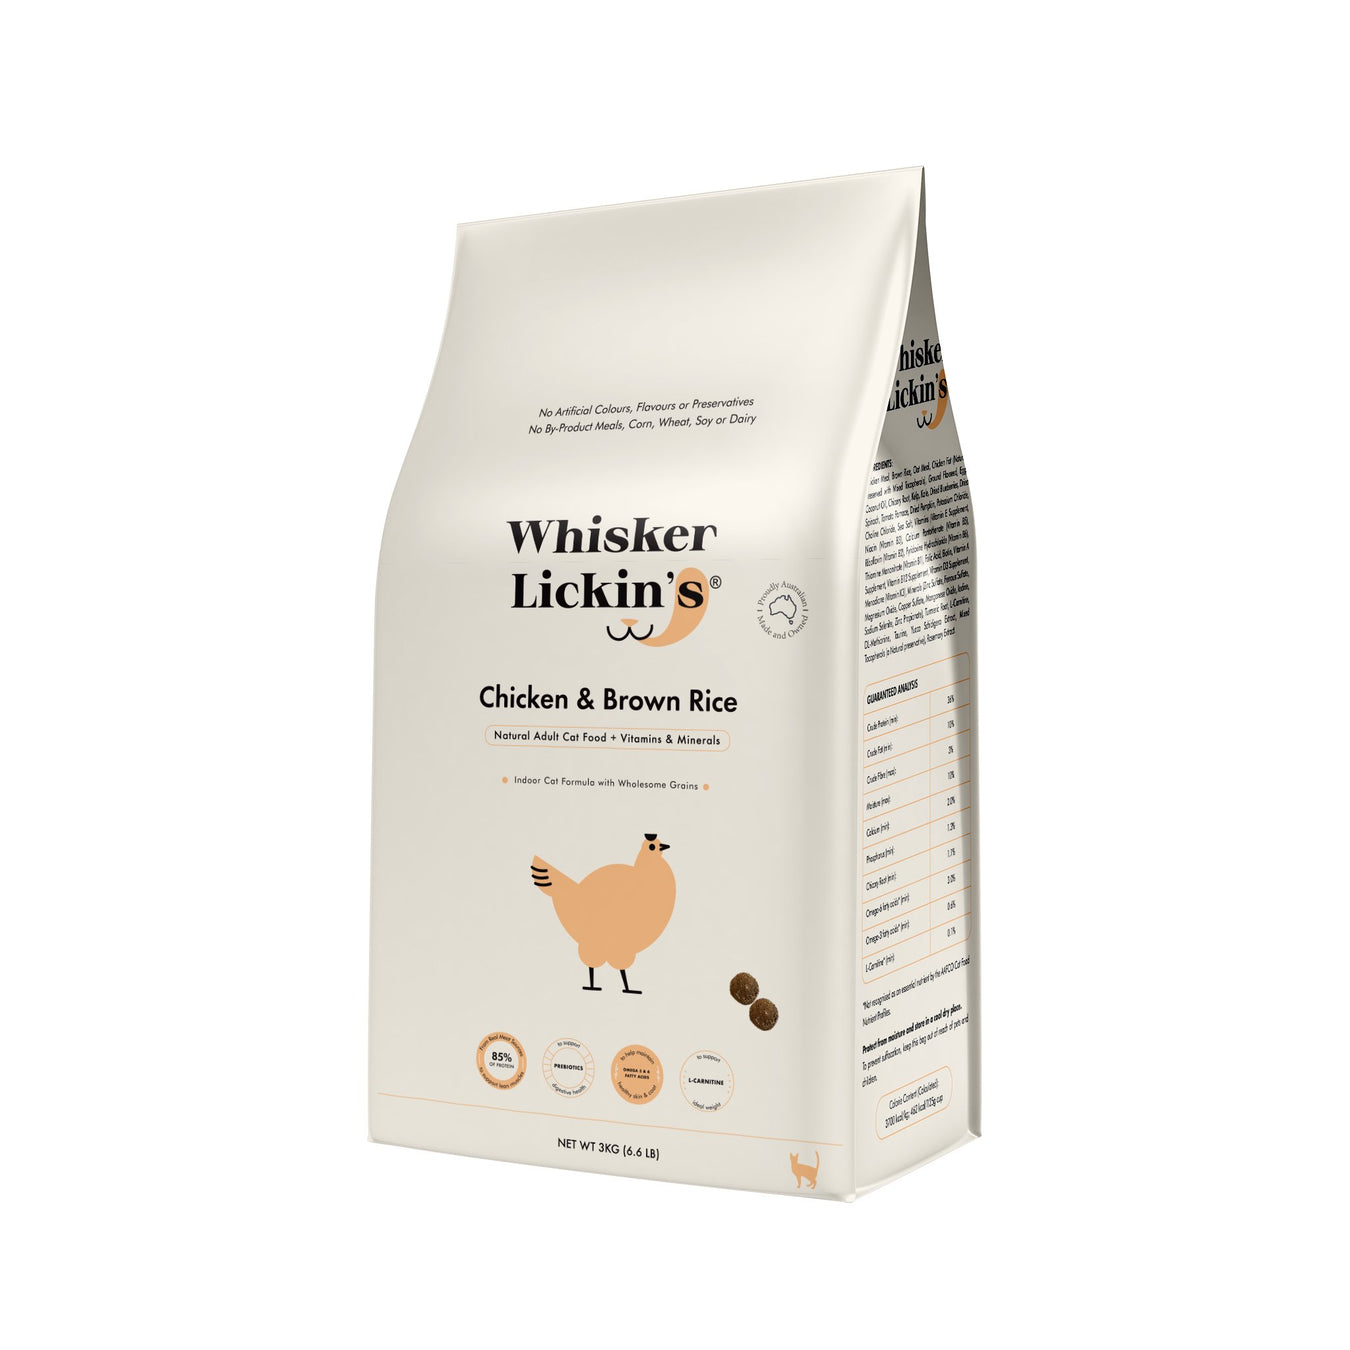 Whisker Lickin's Single-Protein